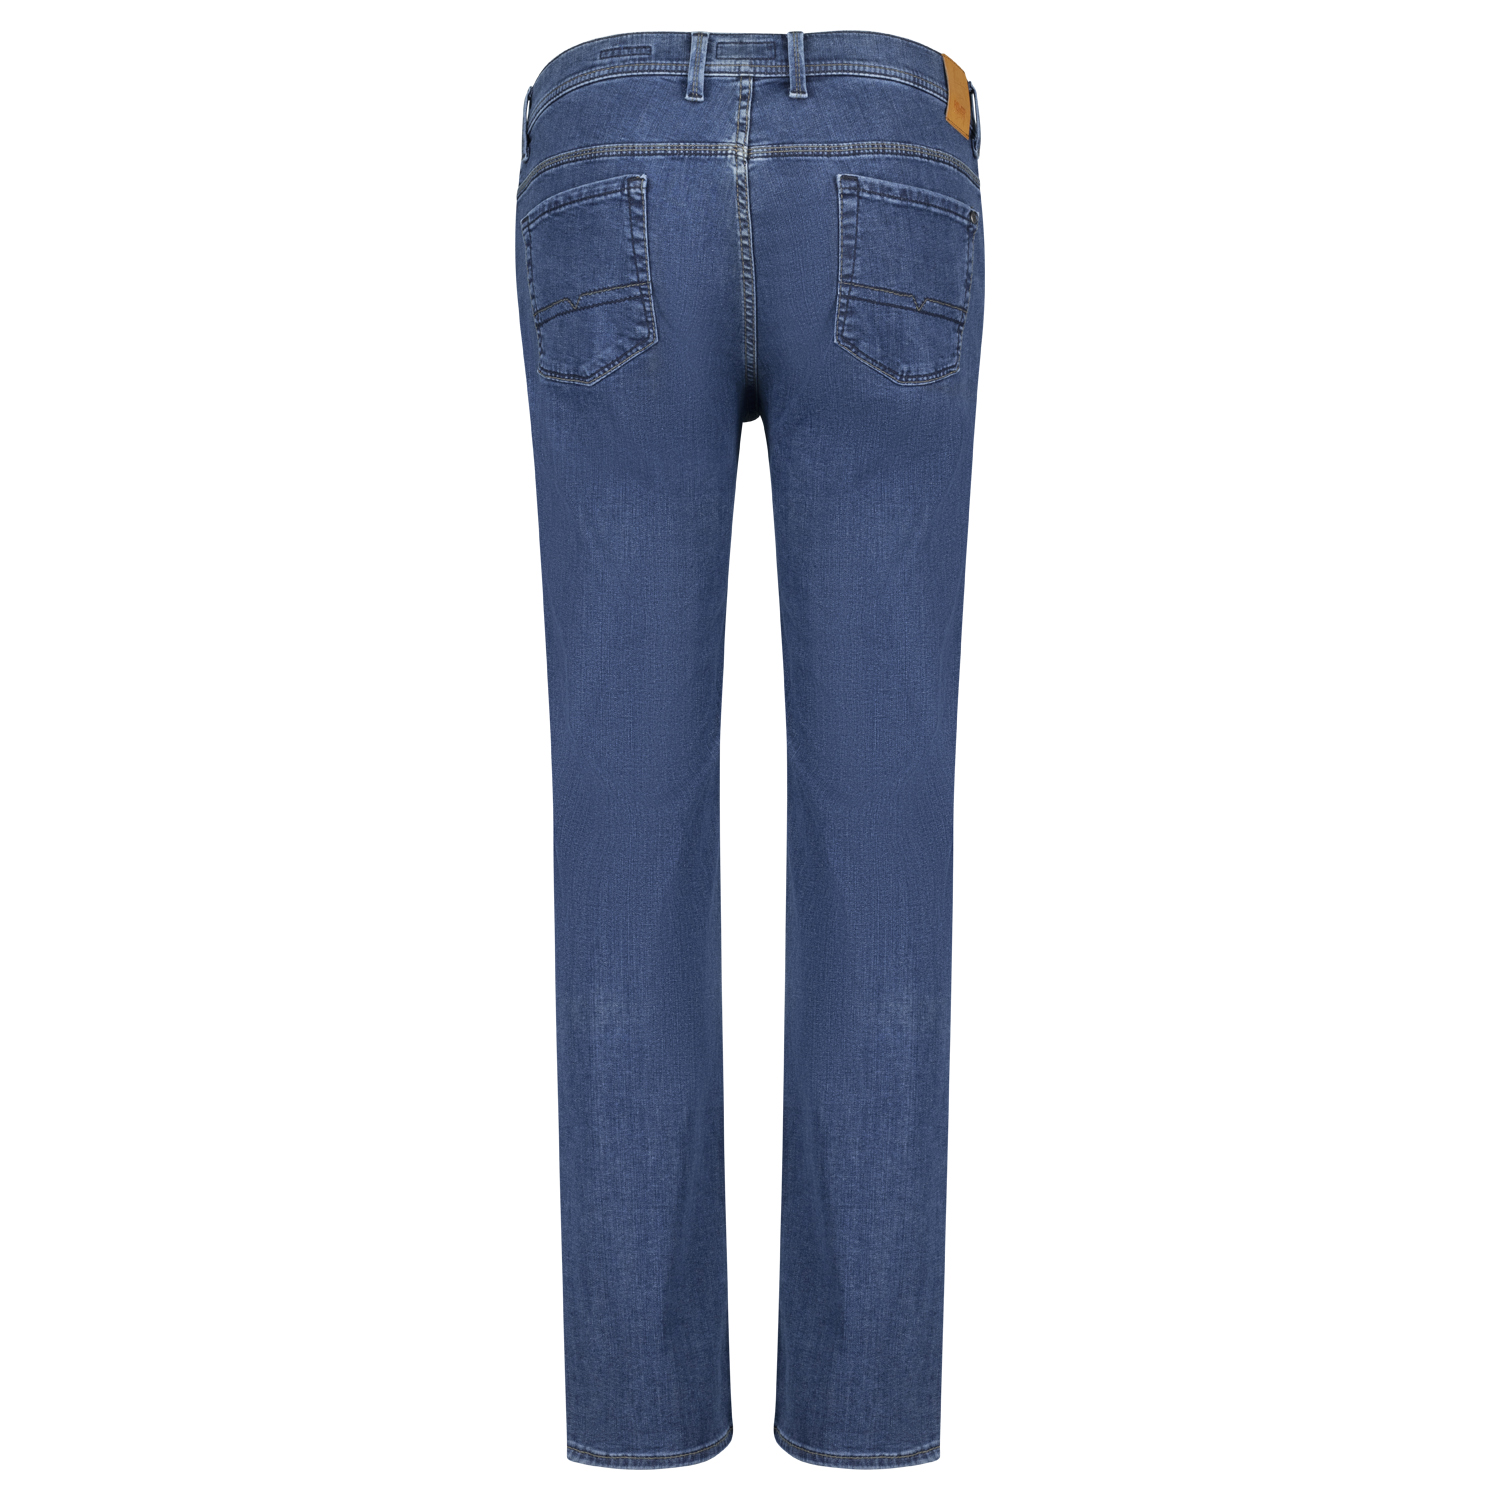 Five pocket jeans model "Thomas" by Pioneer in oversize blue stonewash (low rise): 28 - 40